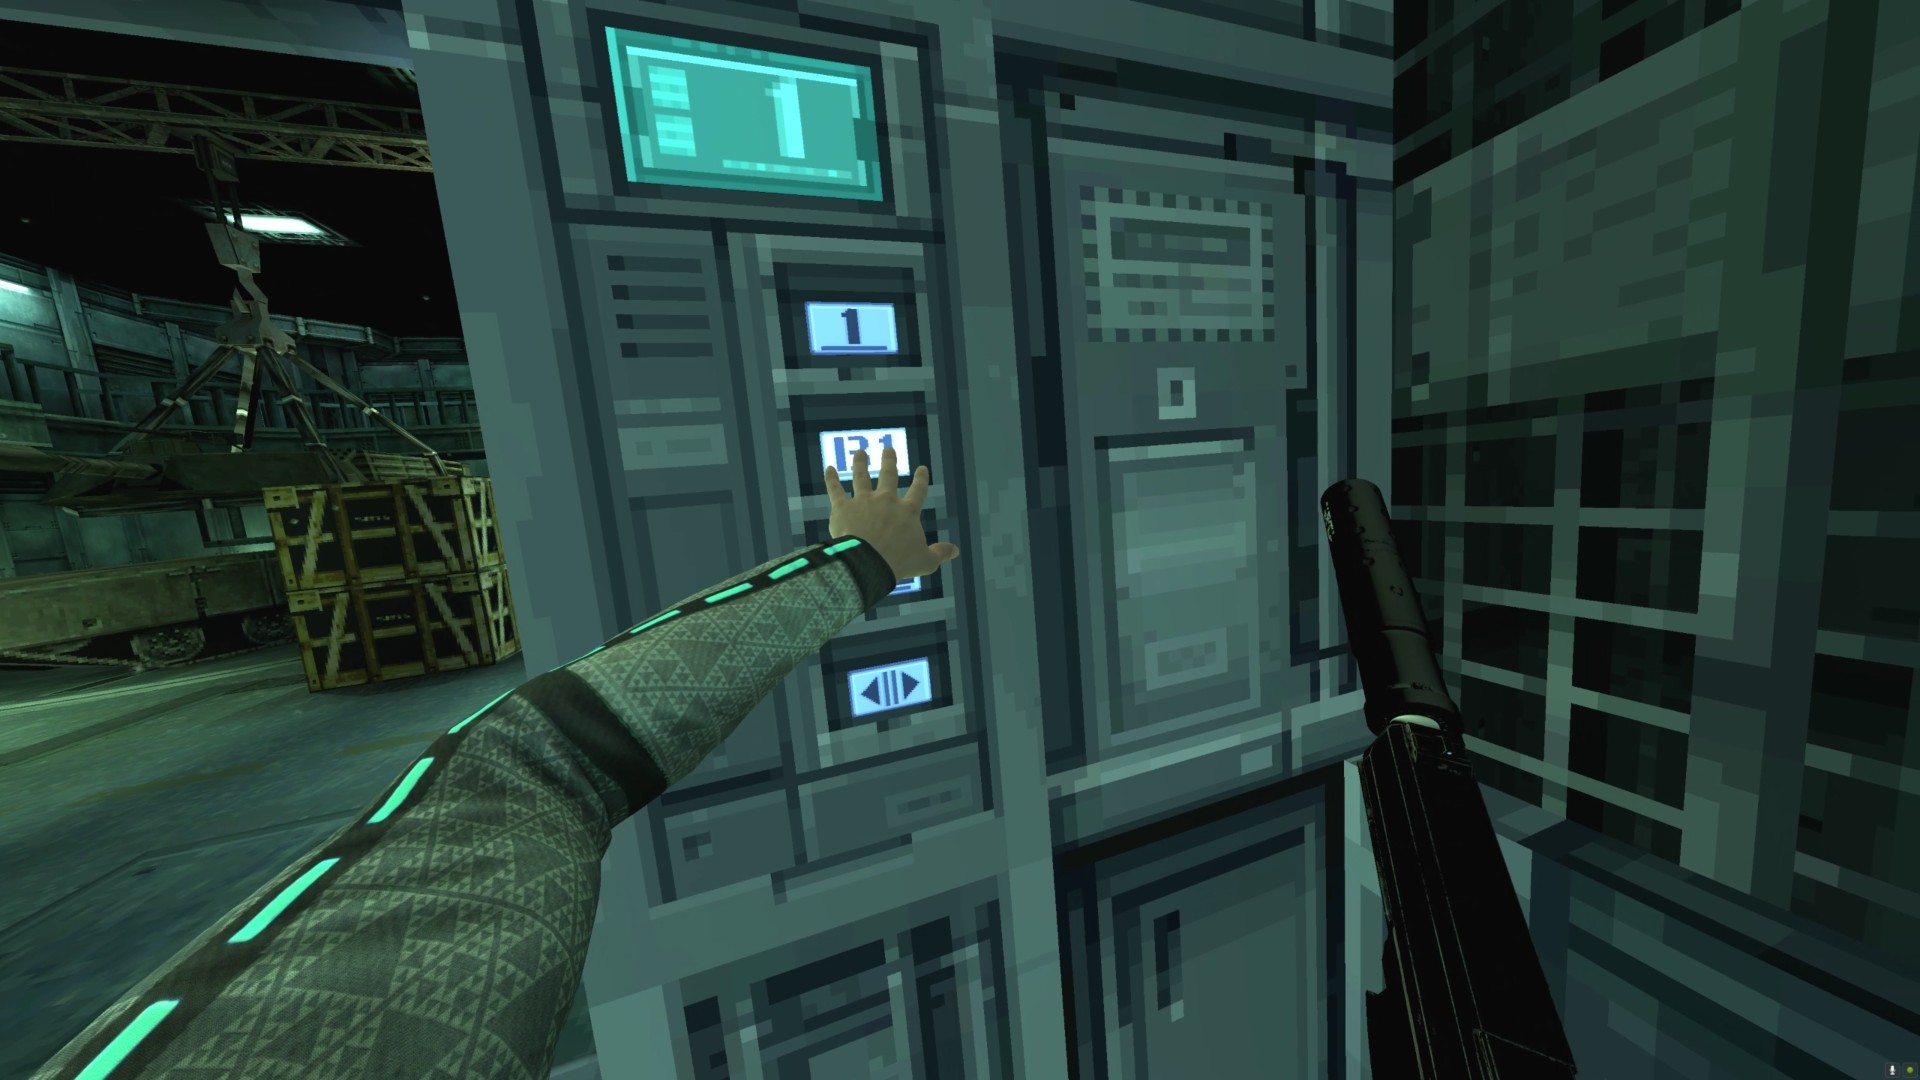 Metal Gear Solid VR mod via Boneworks with plans for Oculus Quest 2. Solid Snake reaches out to press an elevator button in first-person.